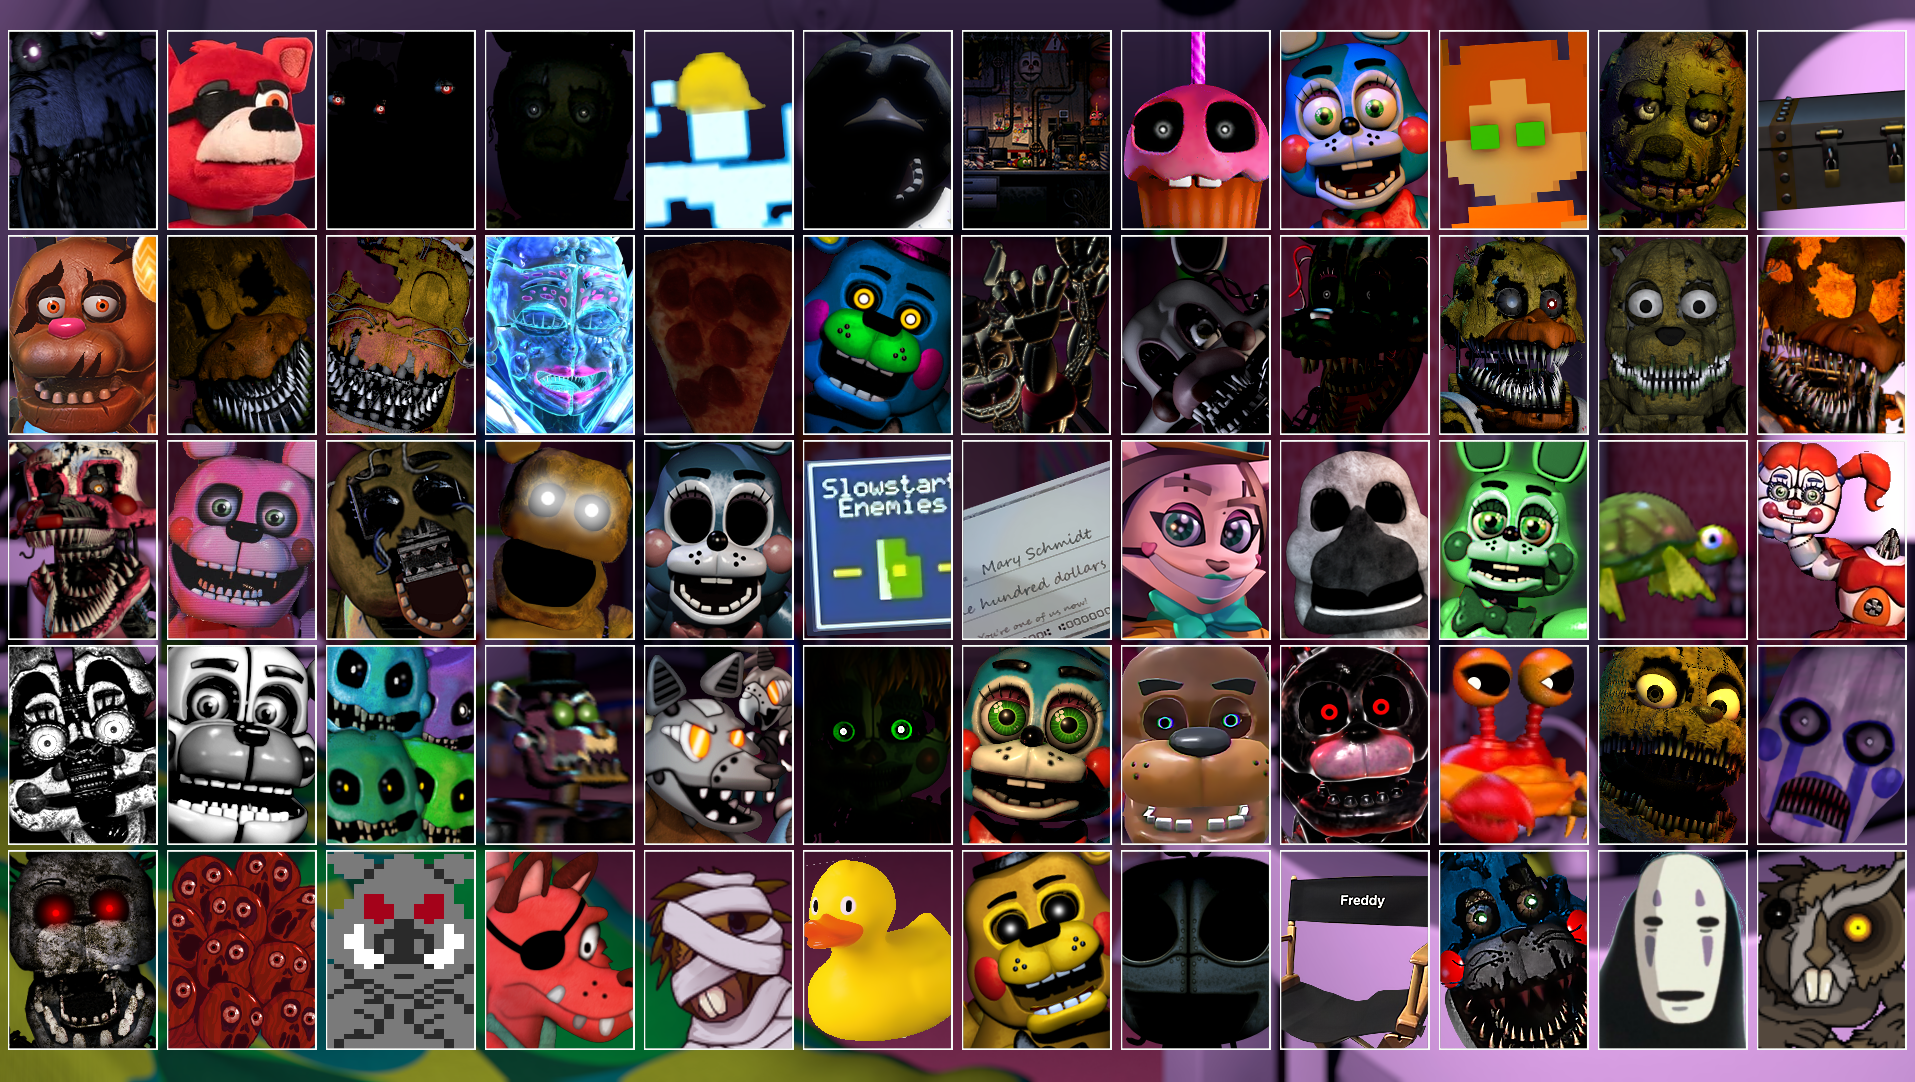 Ultimate Custom Night delivers the ultimate Five Nights at